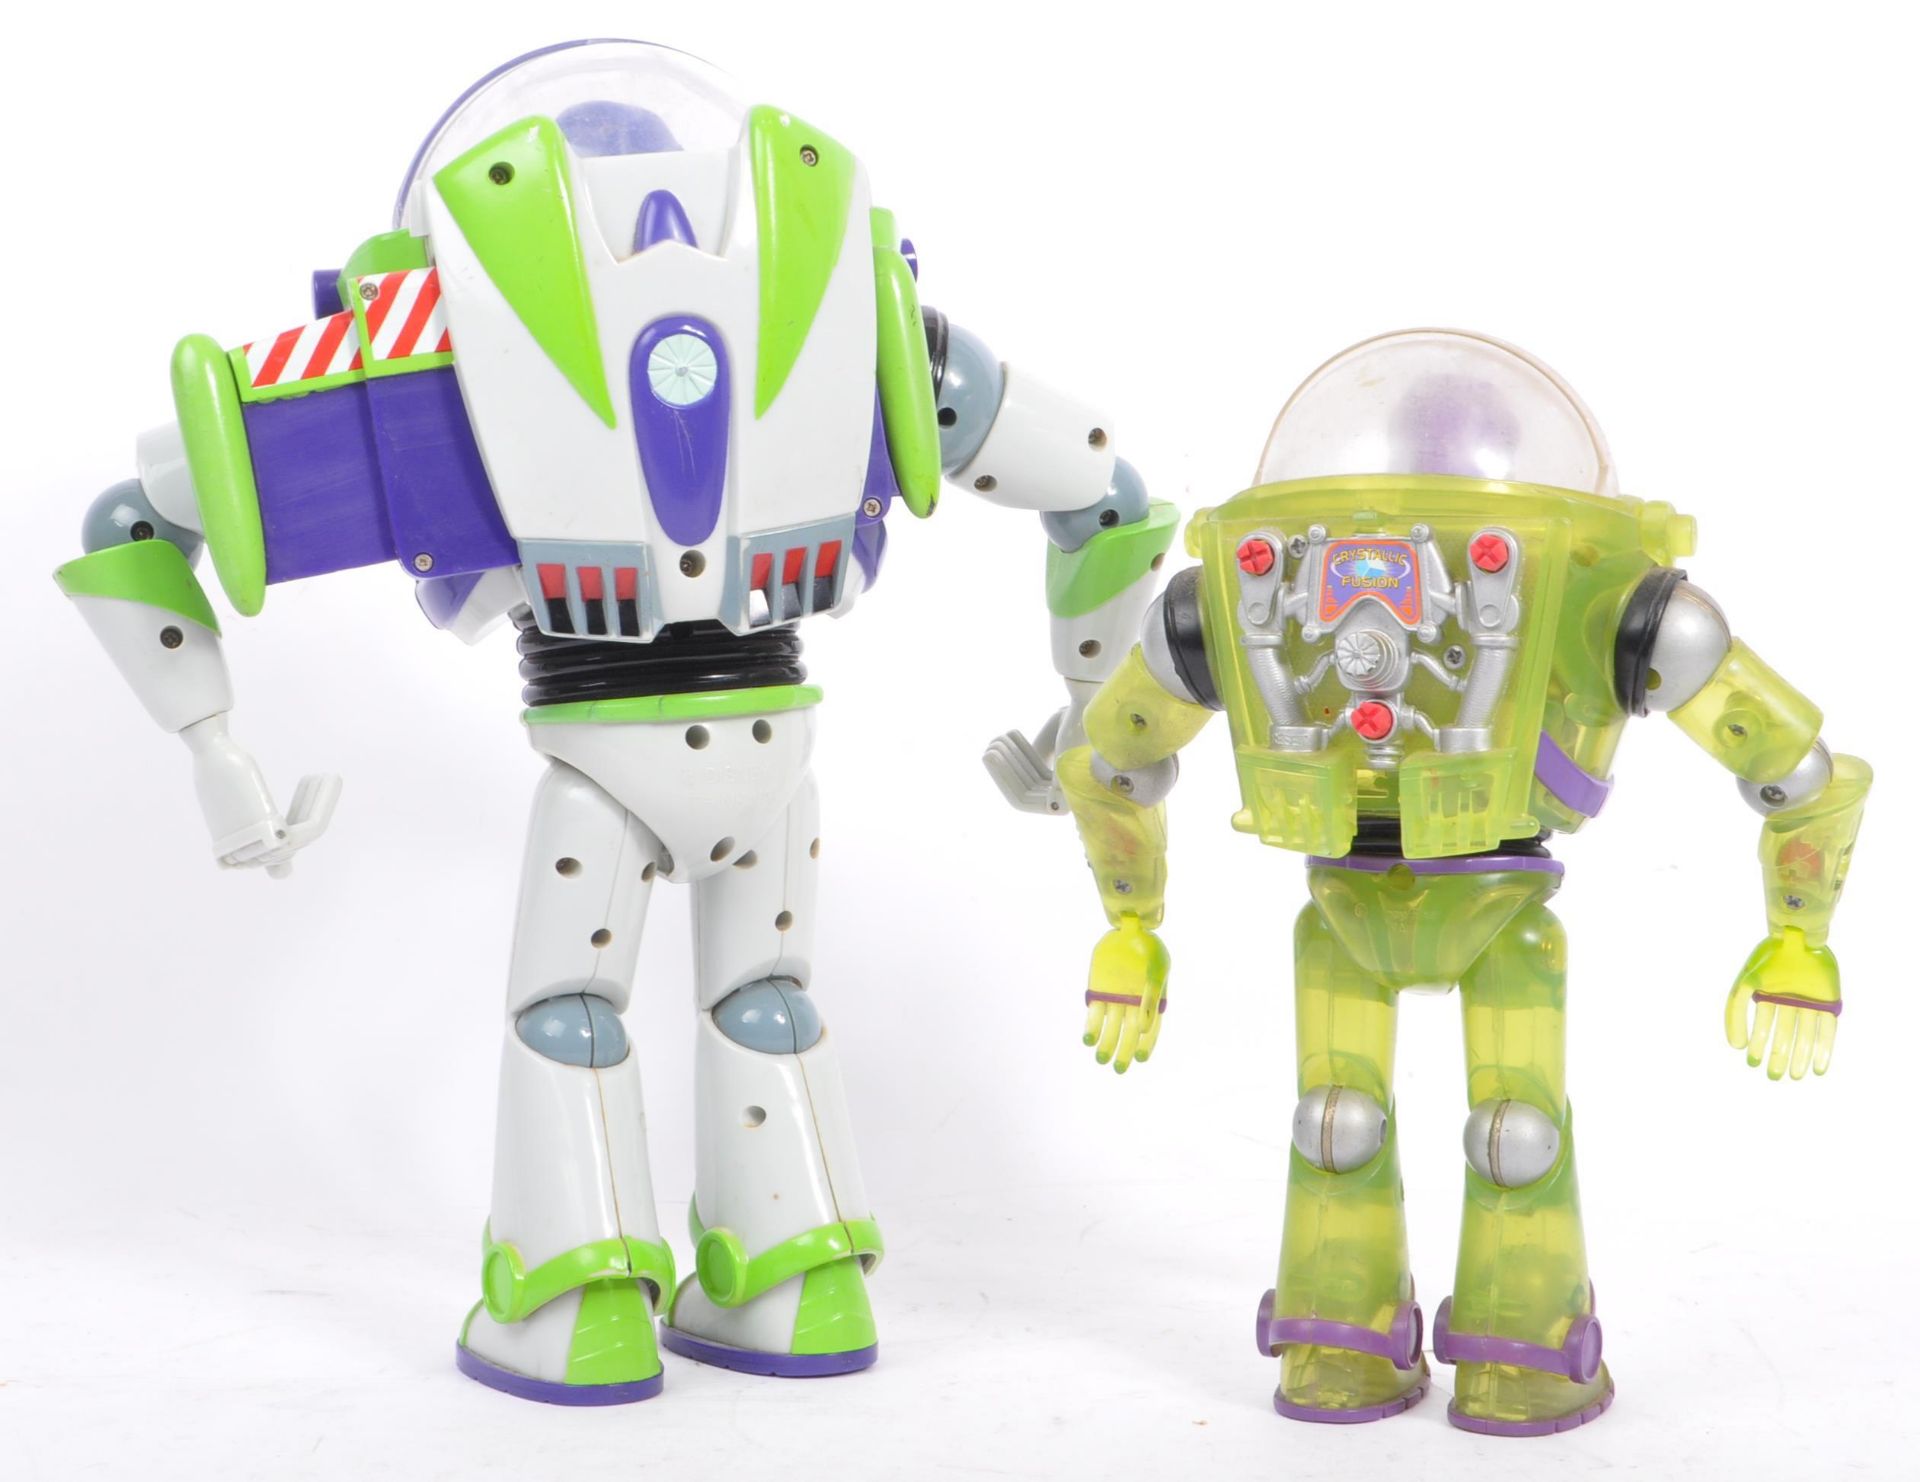 TWO VINTAGE 20TH CENTURY BUZZ LIGHTYEAR ACTION FIGURINES - Image 4 of 5